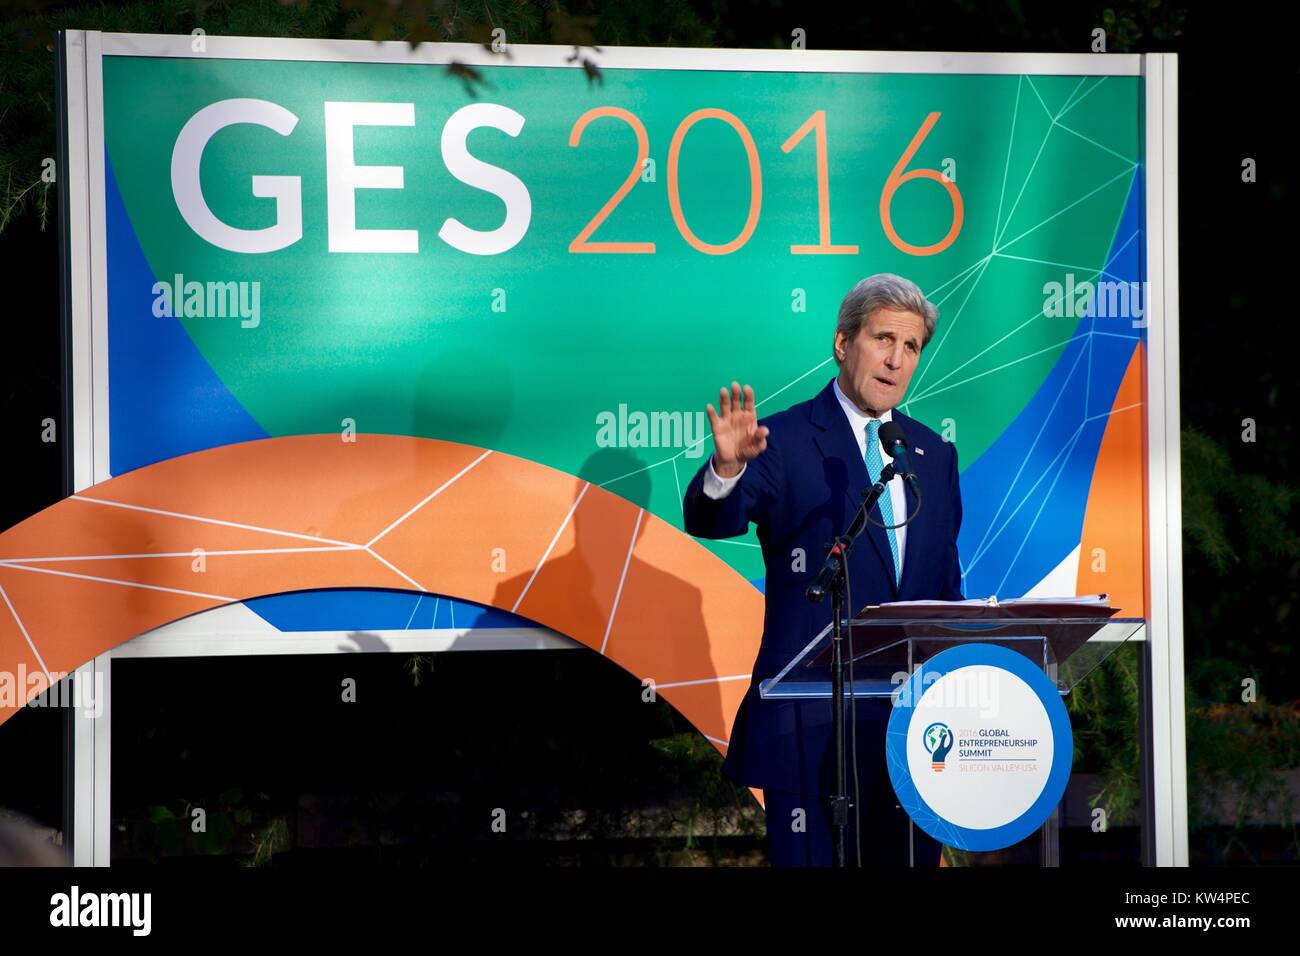 US Secretary of State John Kerry deliver welcoming remarks at the Global Entrepreneurial Summit, Palo Alto, California, June 22, 2016. Image courtesy US Department of State. Stock Photo